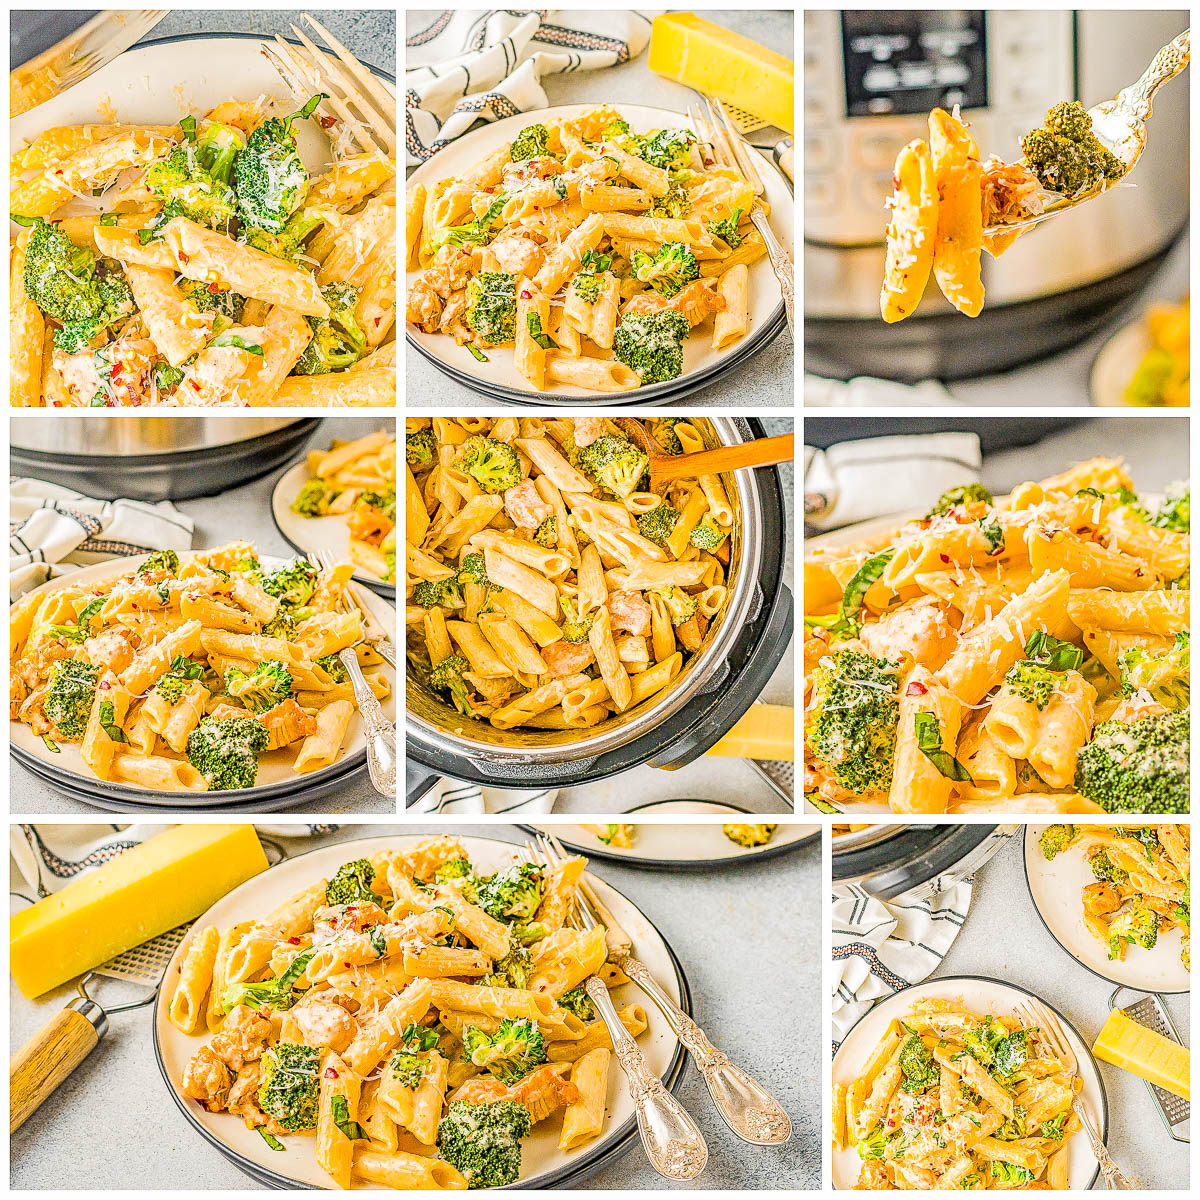 Instant Pot Chicken Broccoli Pasta - Juicy seasoned chicken with pasta and broccoli, all tossed in an AMAZING creamy cheese sauce! A family favorite EASY dinner recipe that's perfect for busy weeknights! Made in the Instant Pot in 30 minutes and stovetop cooking directions are also provided.